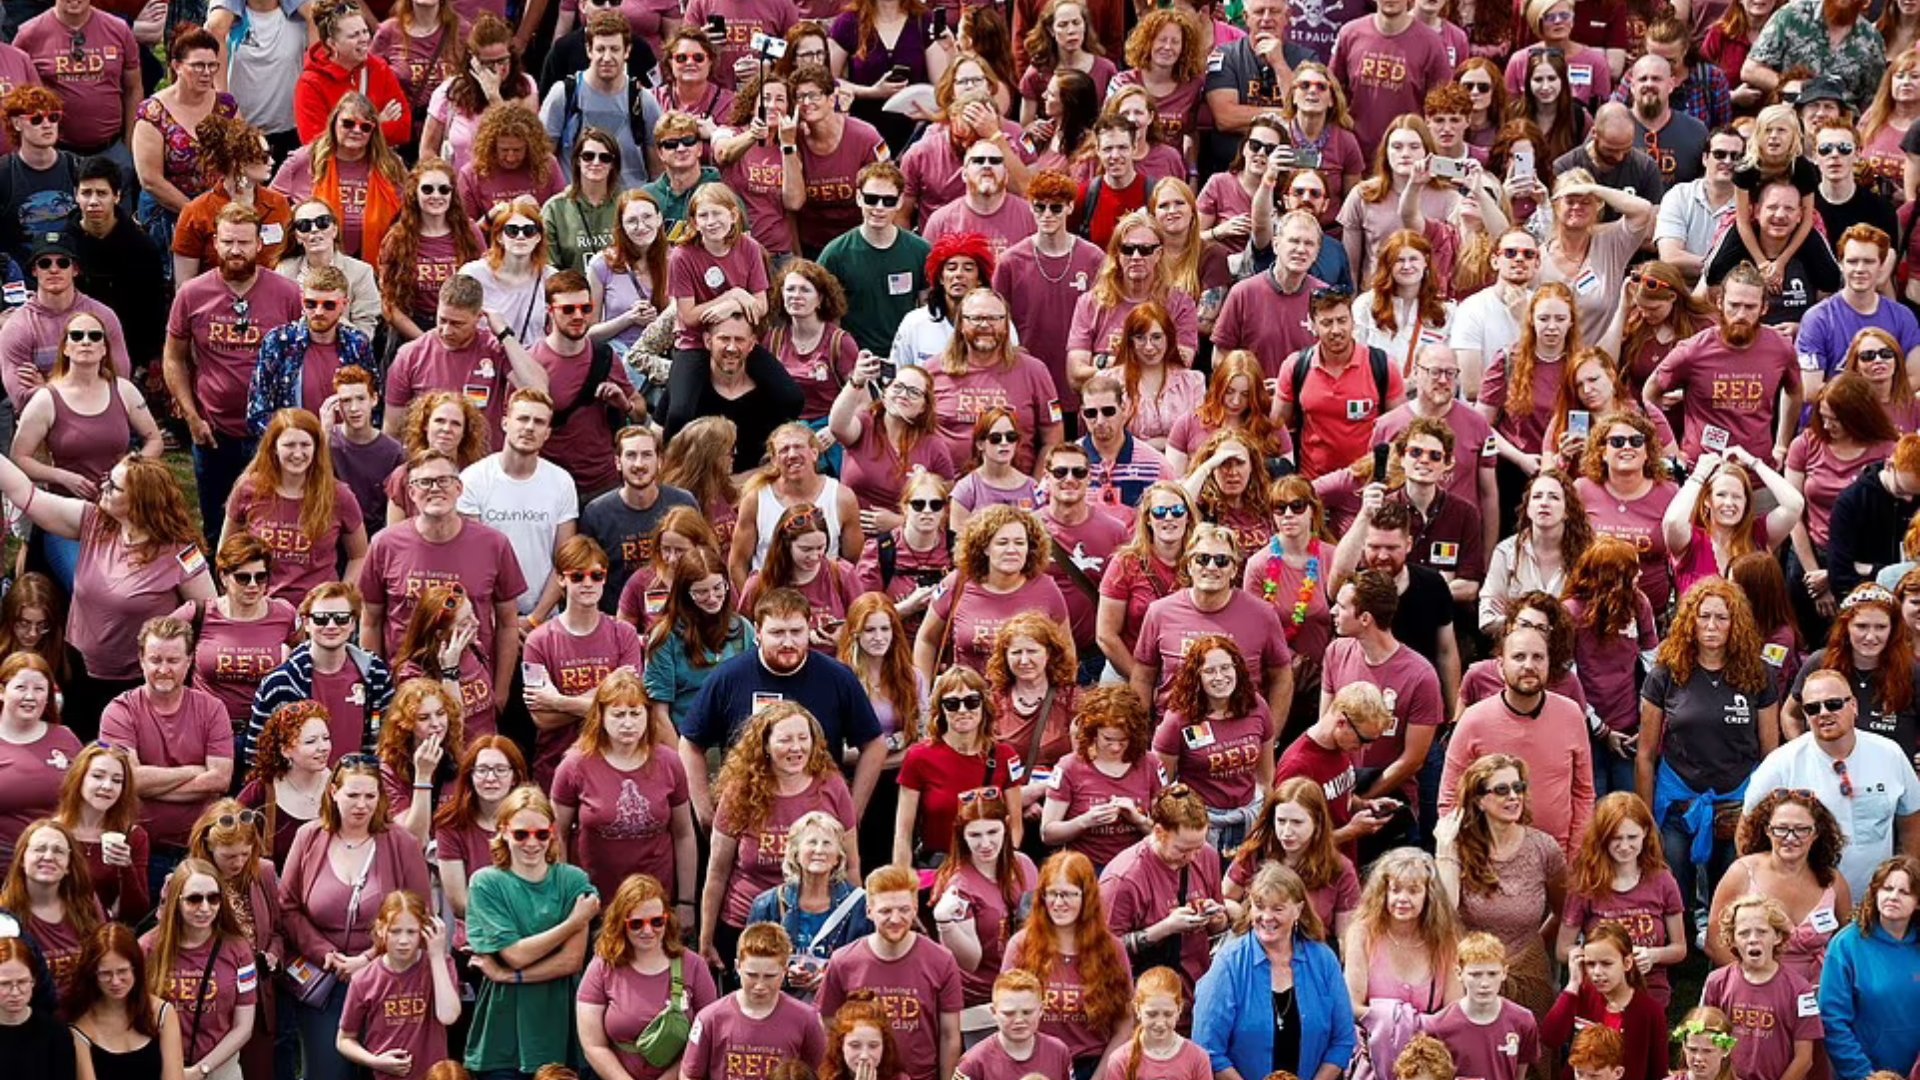 Photos: The 2023 Redhead Days Festival in the Netherlands